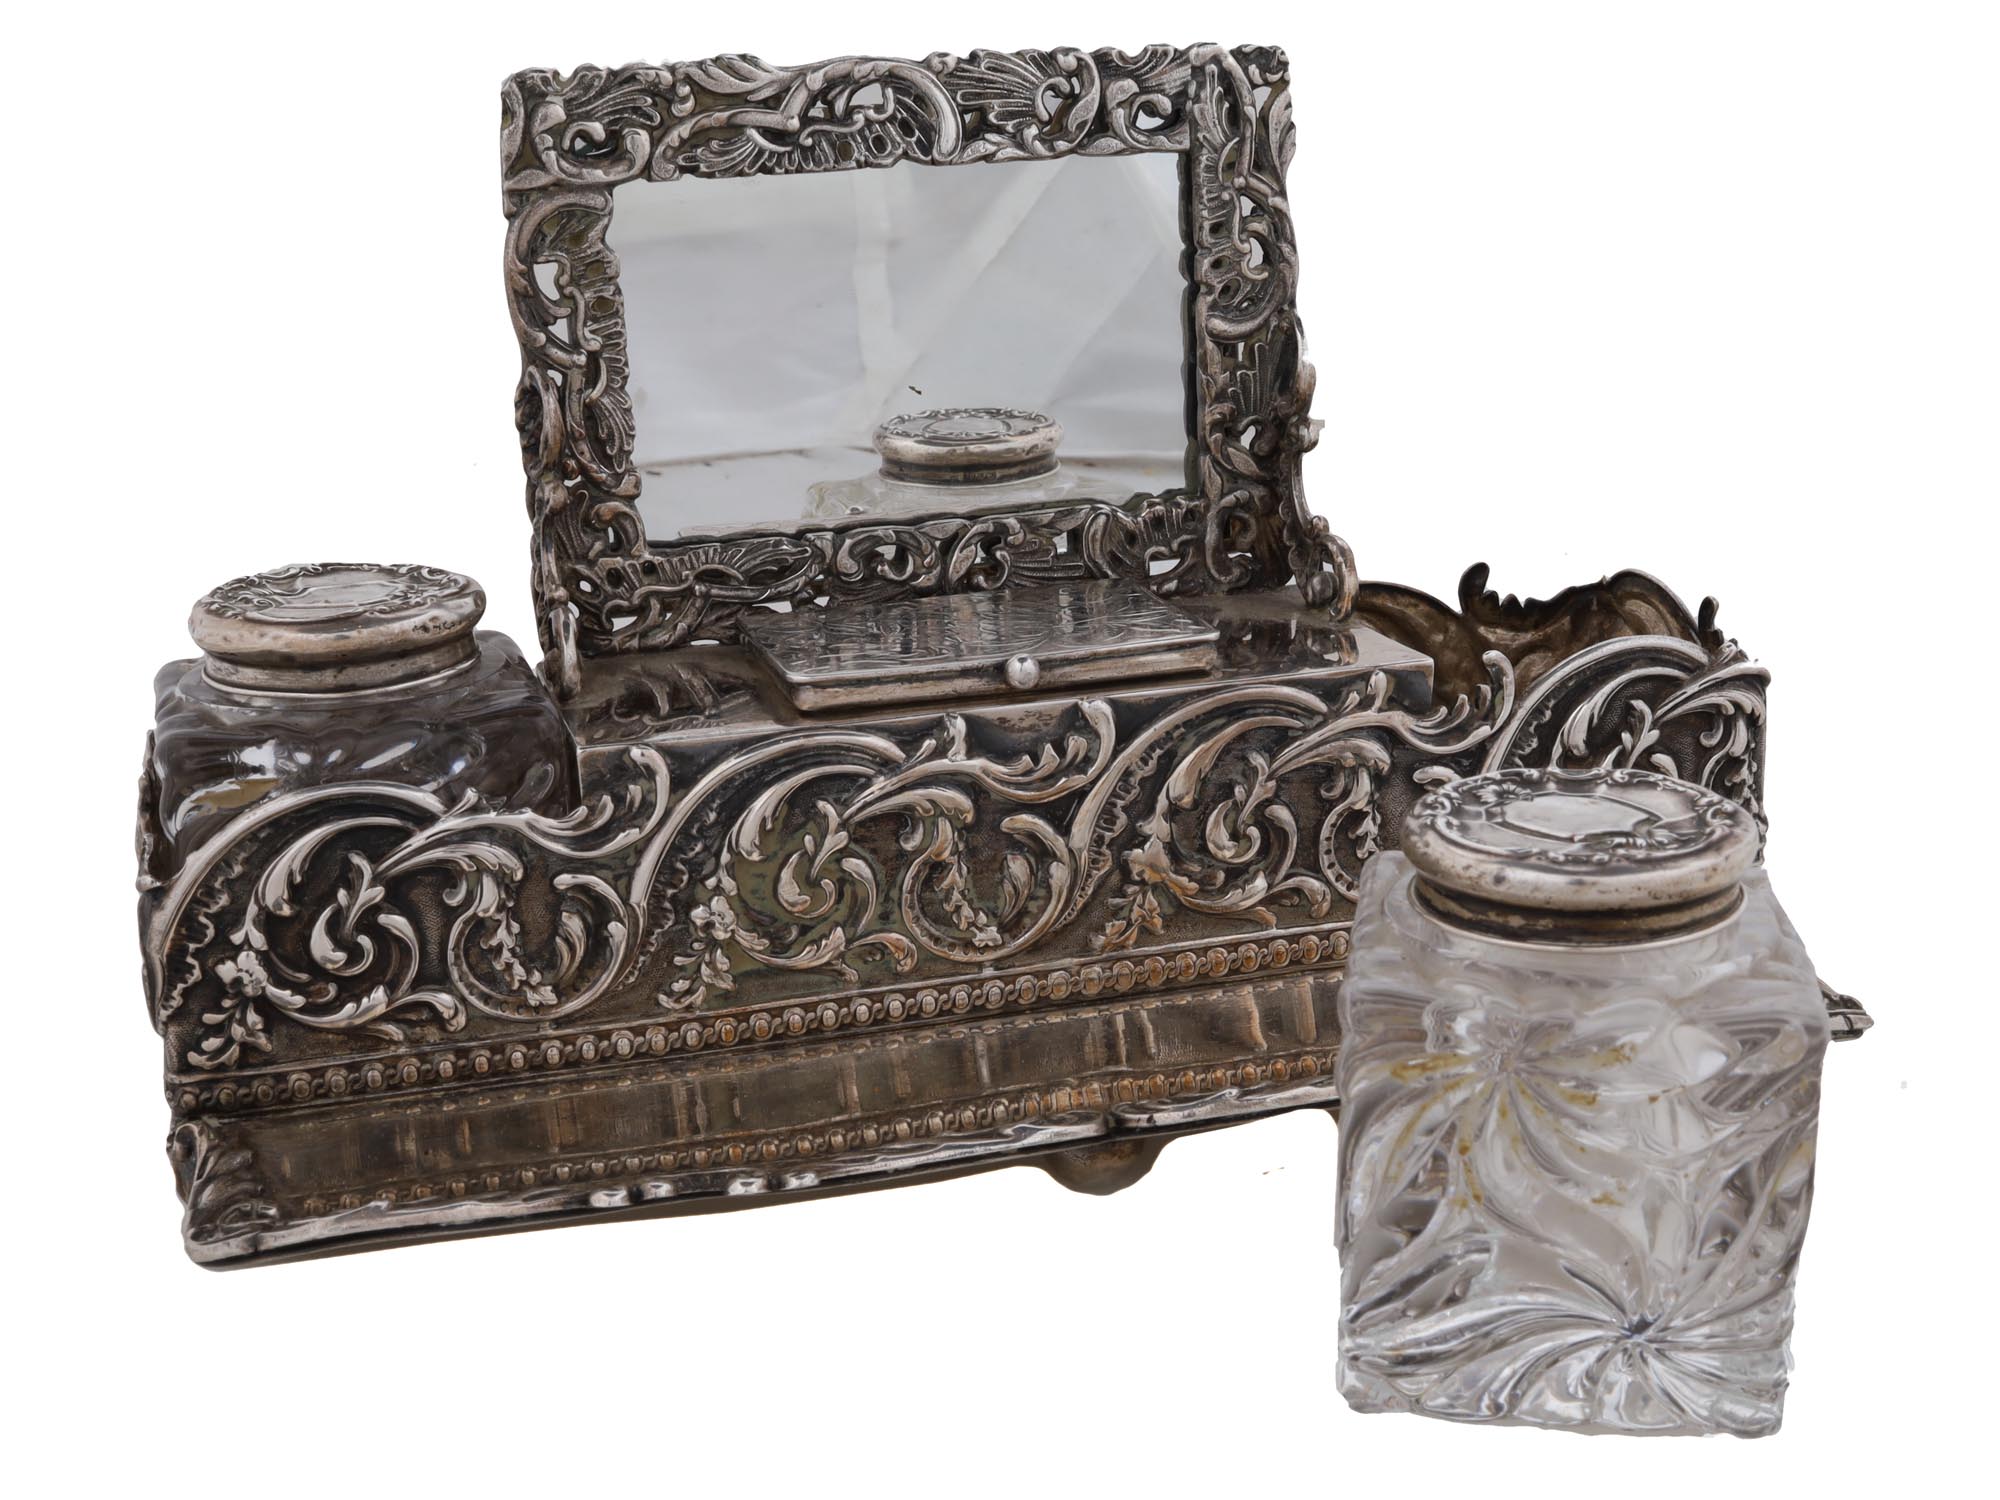 ANTIQUE SILVER AND GLASS INKWELL SET WITH MIRROR PIC-4